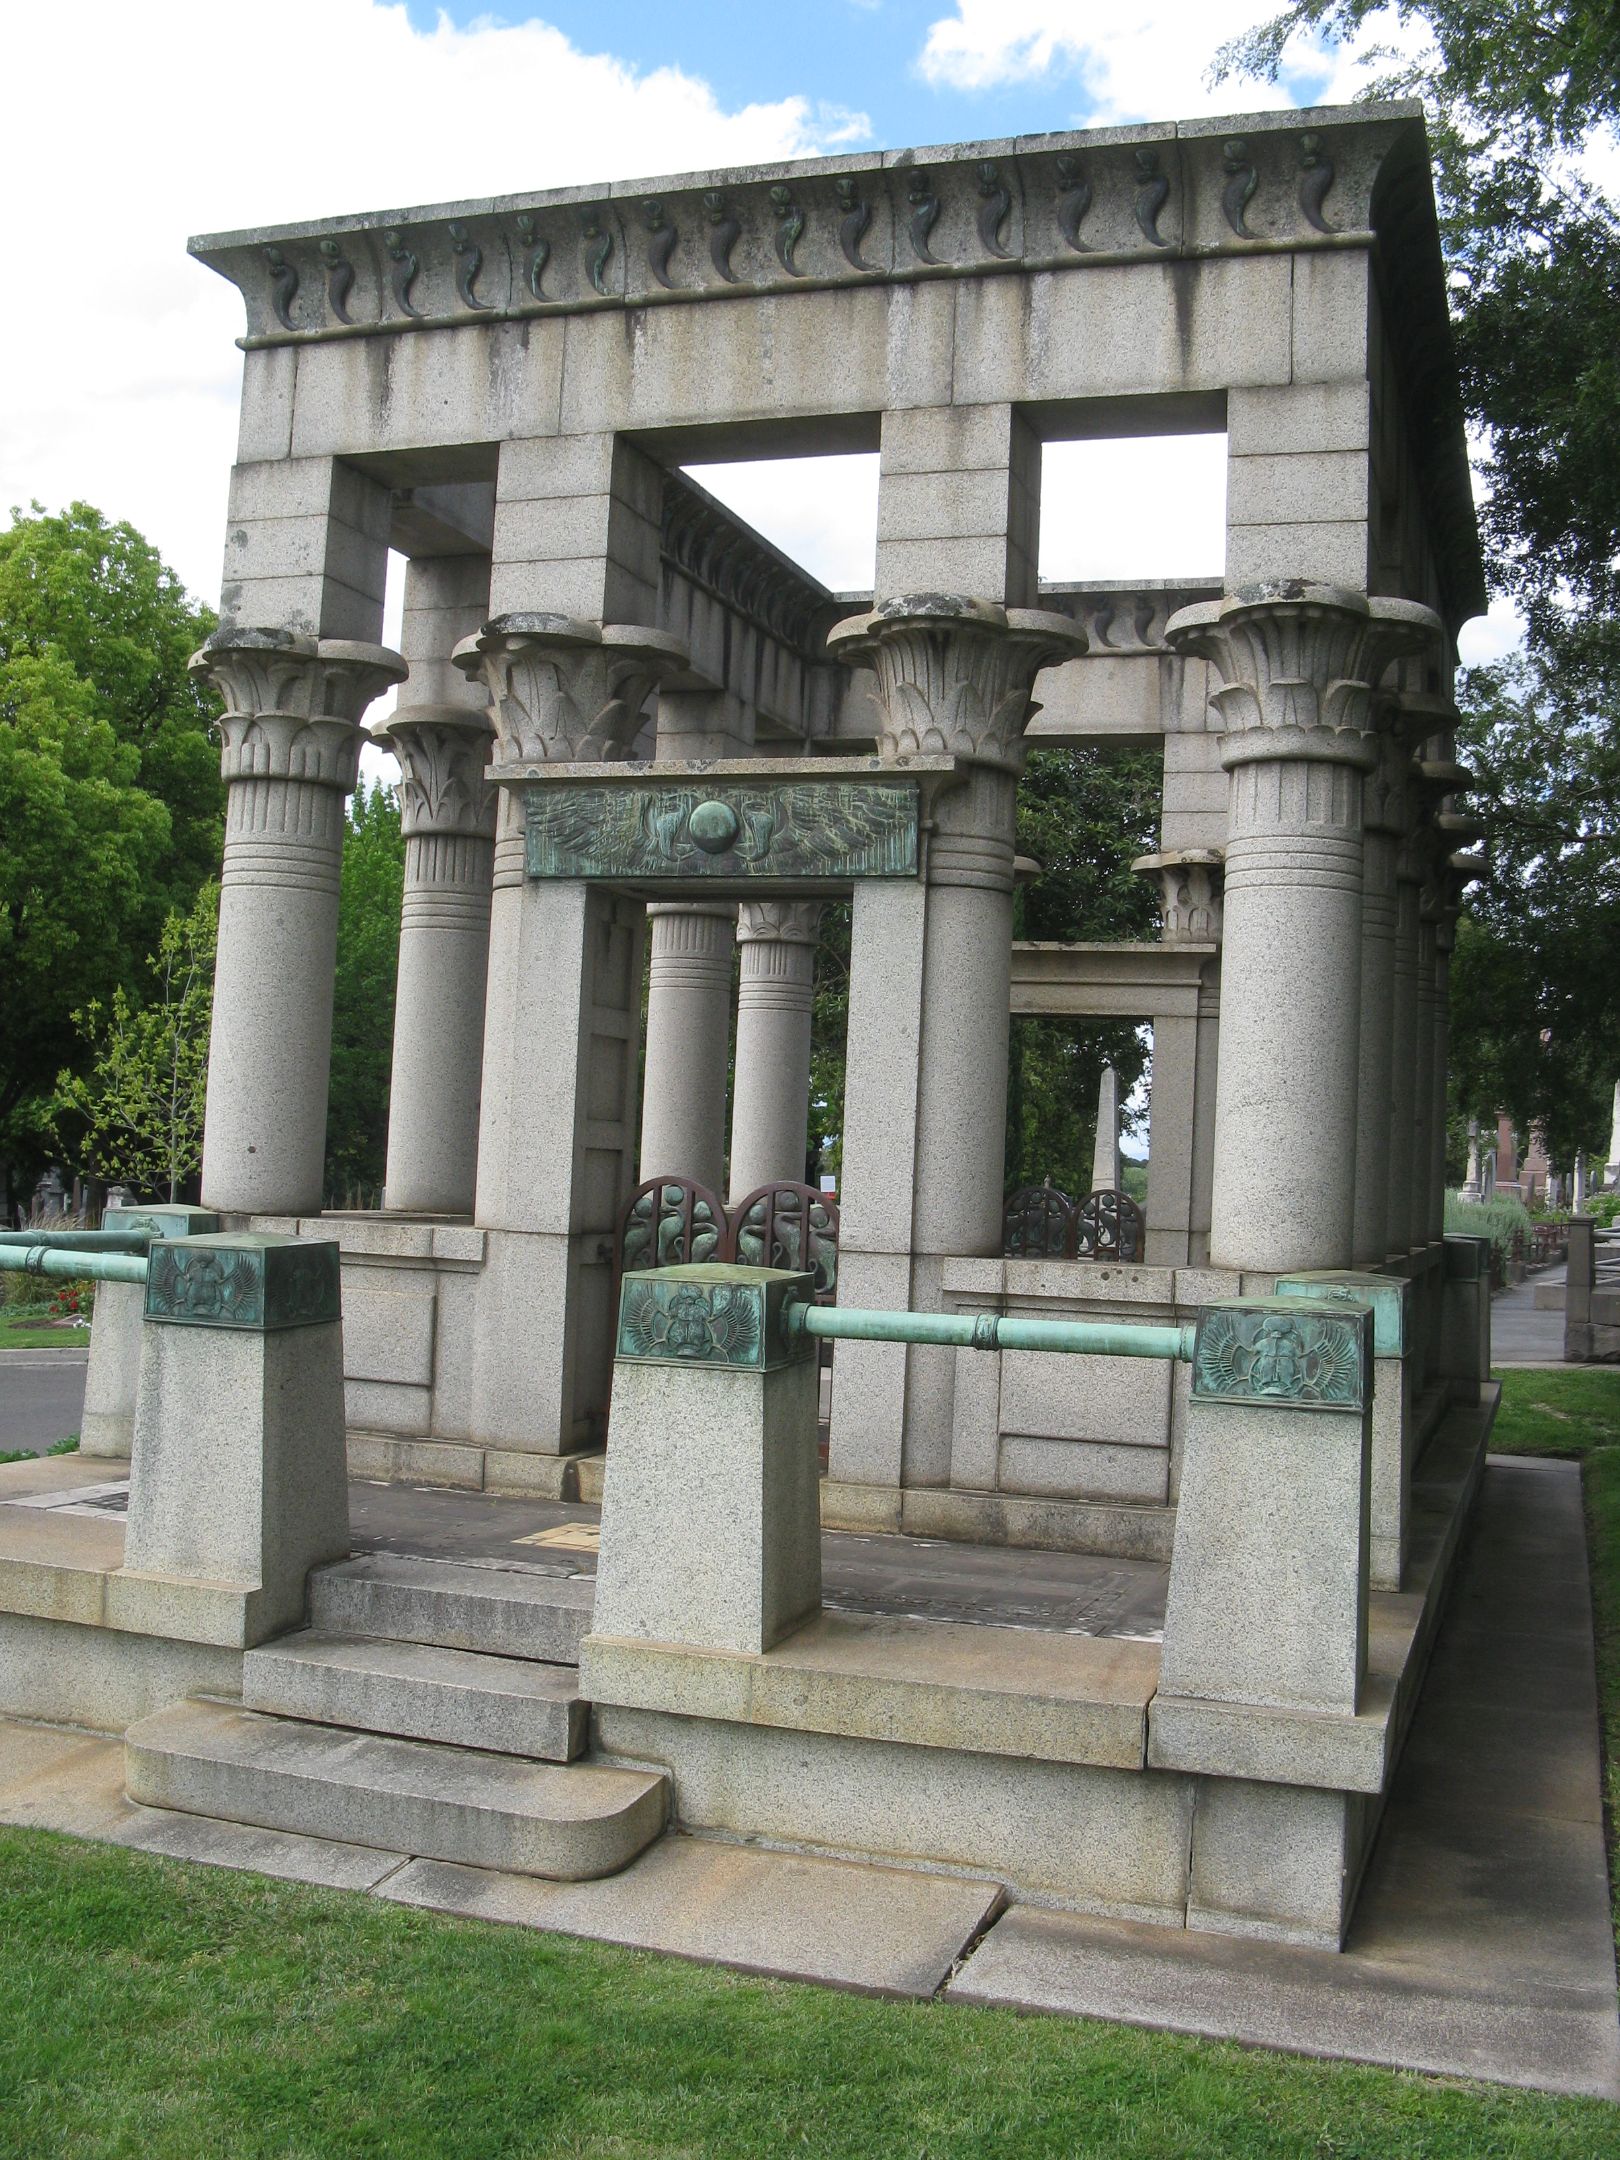 A memorial made out of multiple stone or granite columns, sitting in a cemetary. 